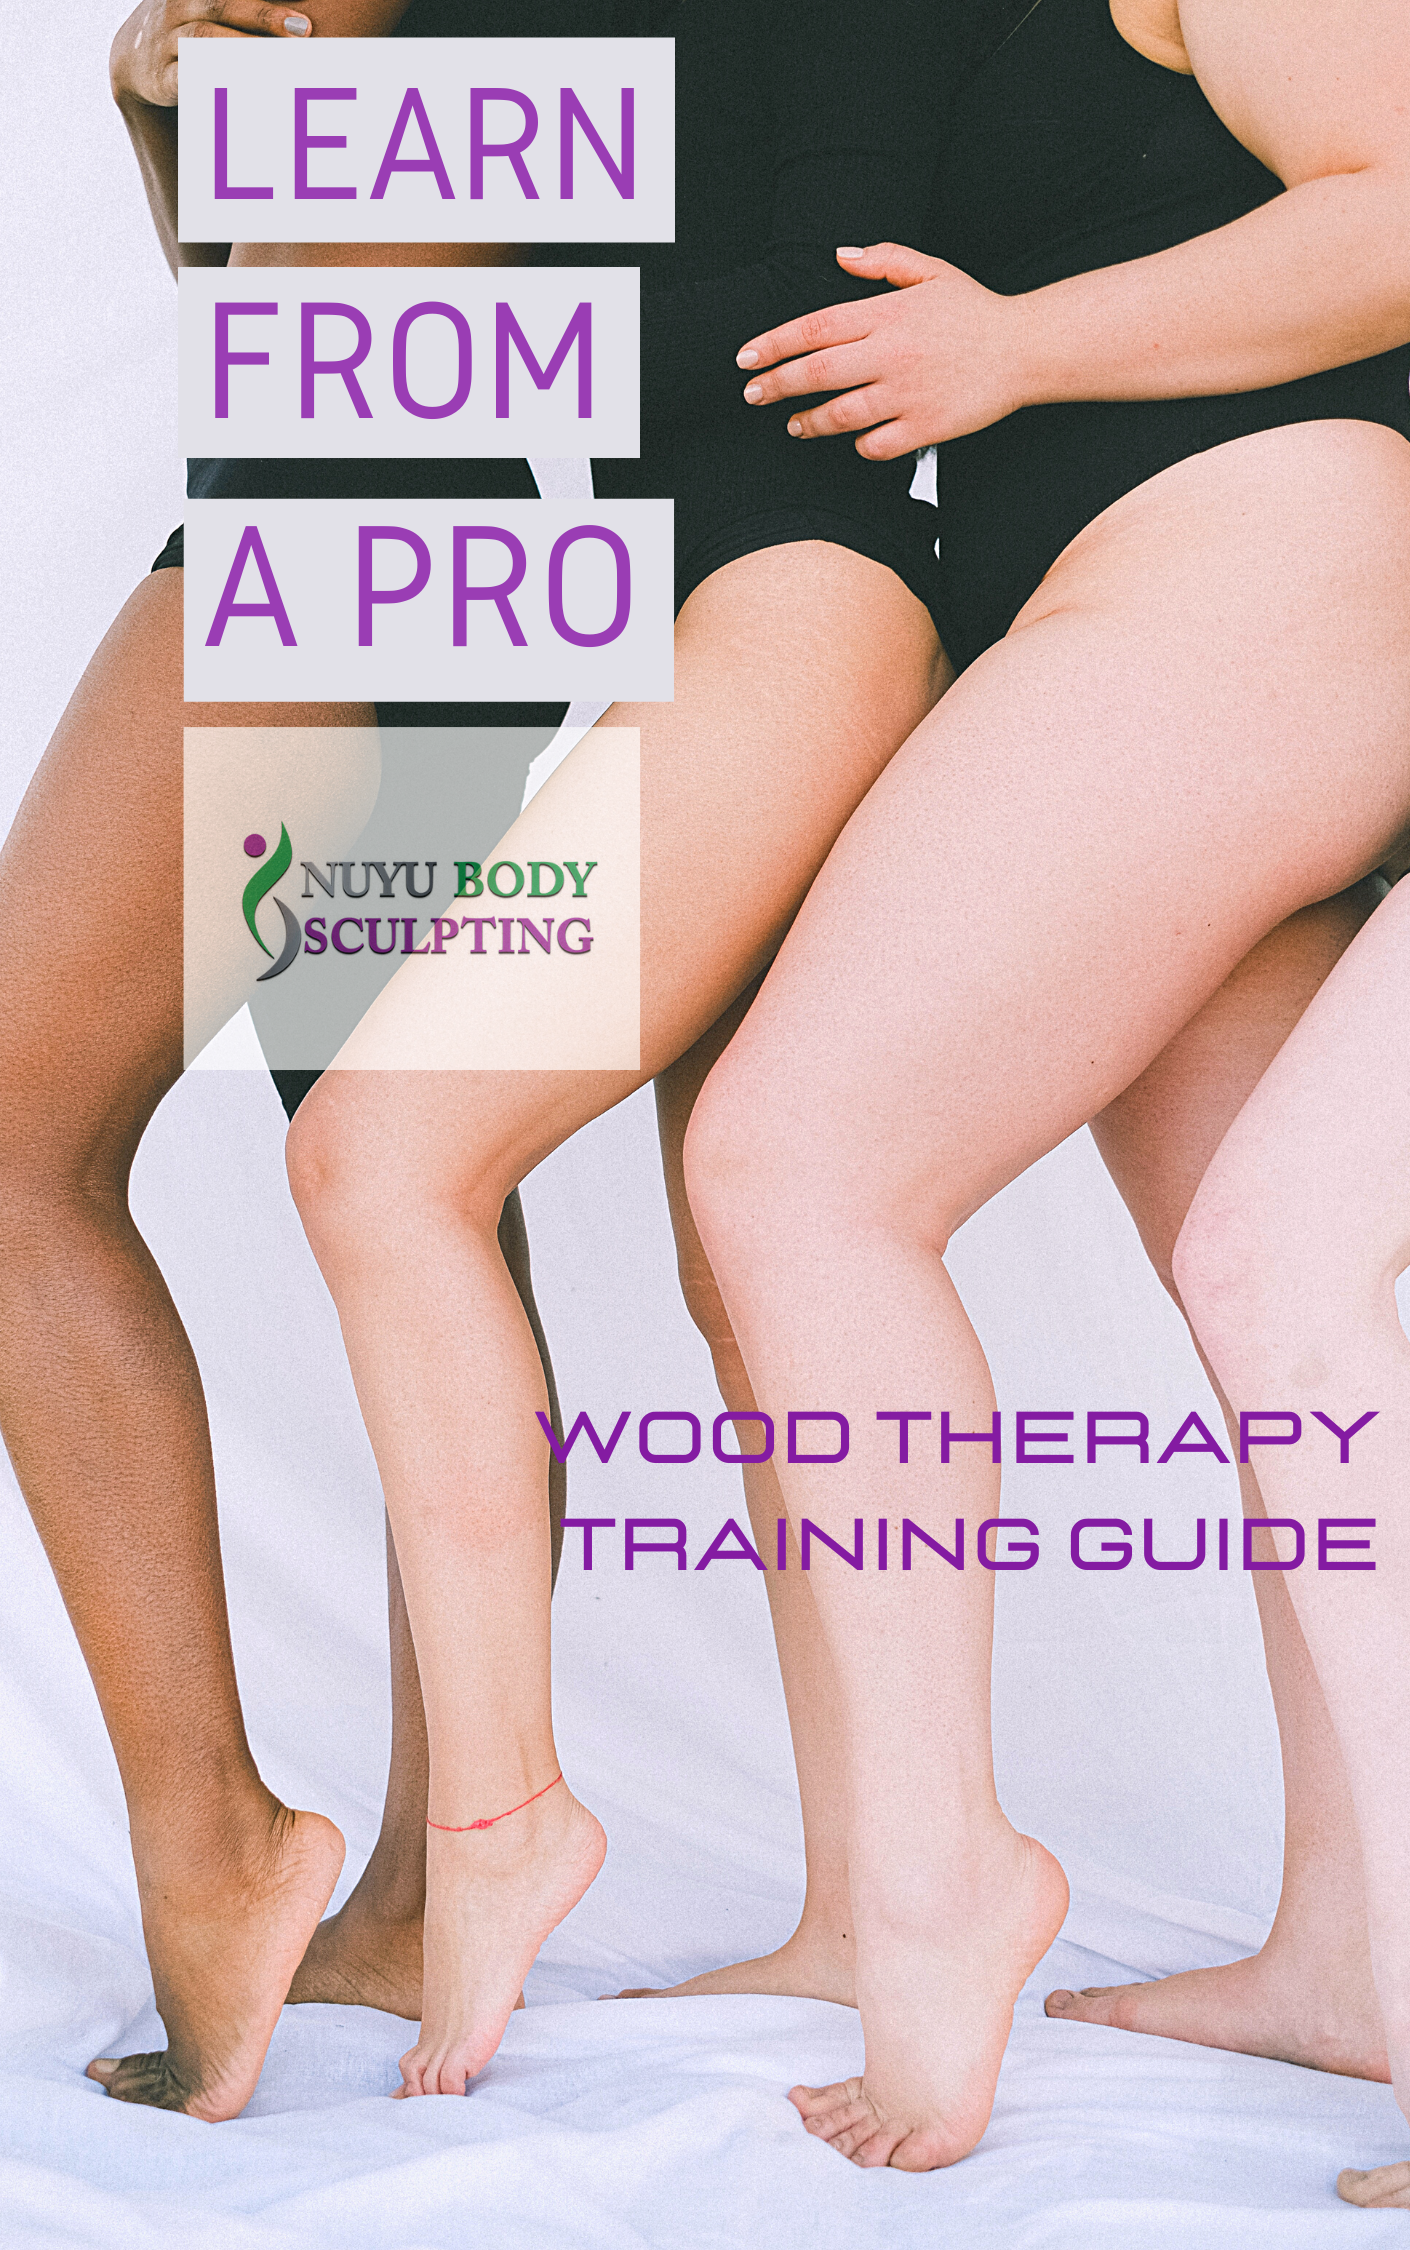  wood therapy training guide  wood therapy training  wood Therapy tools  wood therapy online training  wood therapy online guide  wood therapy massage training  Wood Therapy Massage Tools  wood therapy for cellulite  wood therapy course online  wood therapy classes near me  wood therapy classes  wood Therapy  wood body sculpting classes  learn wood therapy  wood therapy tools  buy wood therapy tools  best wood therapy training course online  best wood therapy training